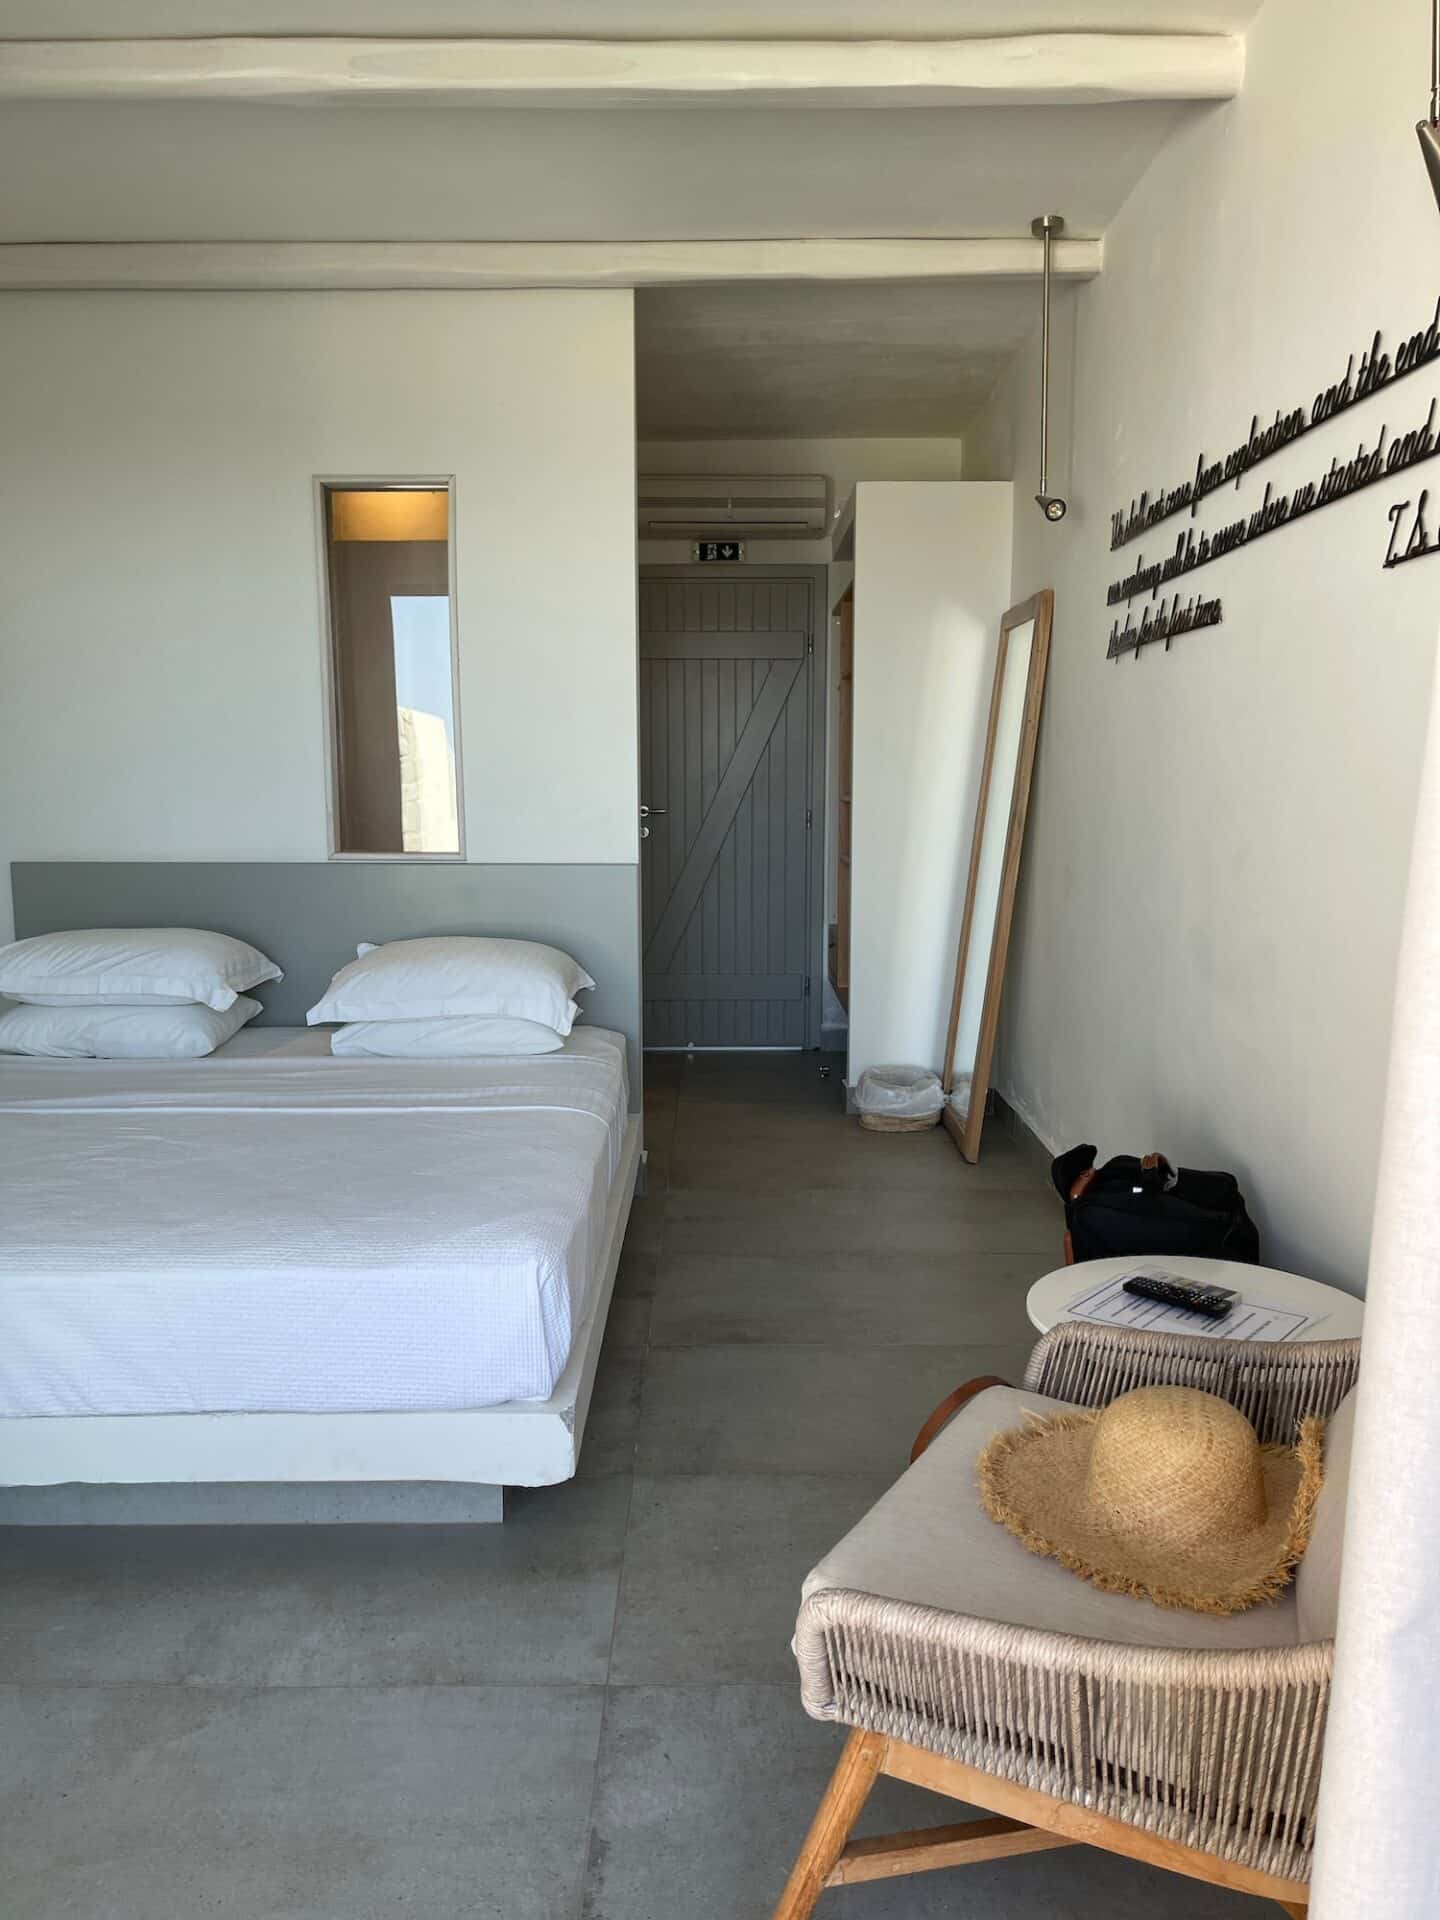 Minimalist style bedroom in Milos with two single beds, a woven hat on a chair suggesting a relaxed holiday vibe, and a mirrored door reflecting the bright, airy space.